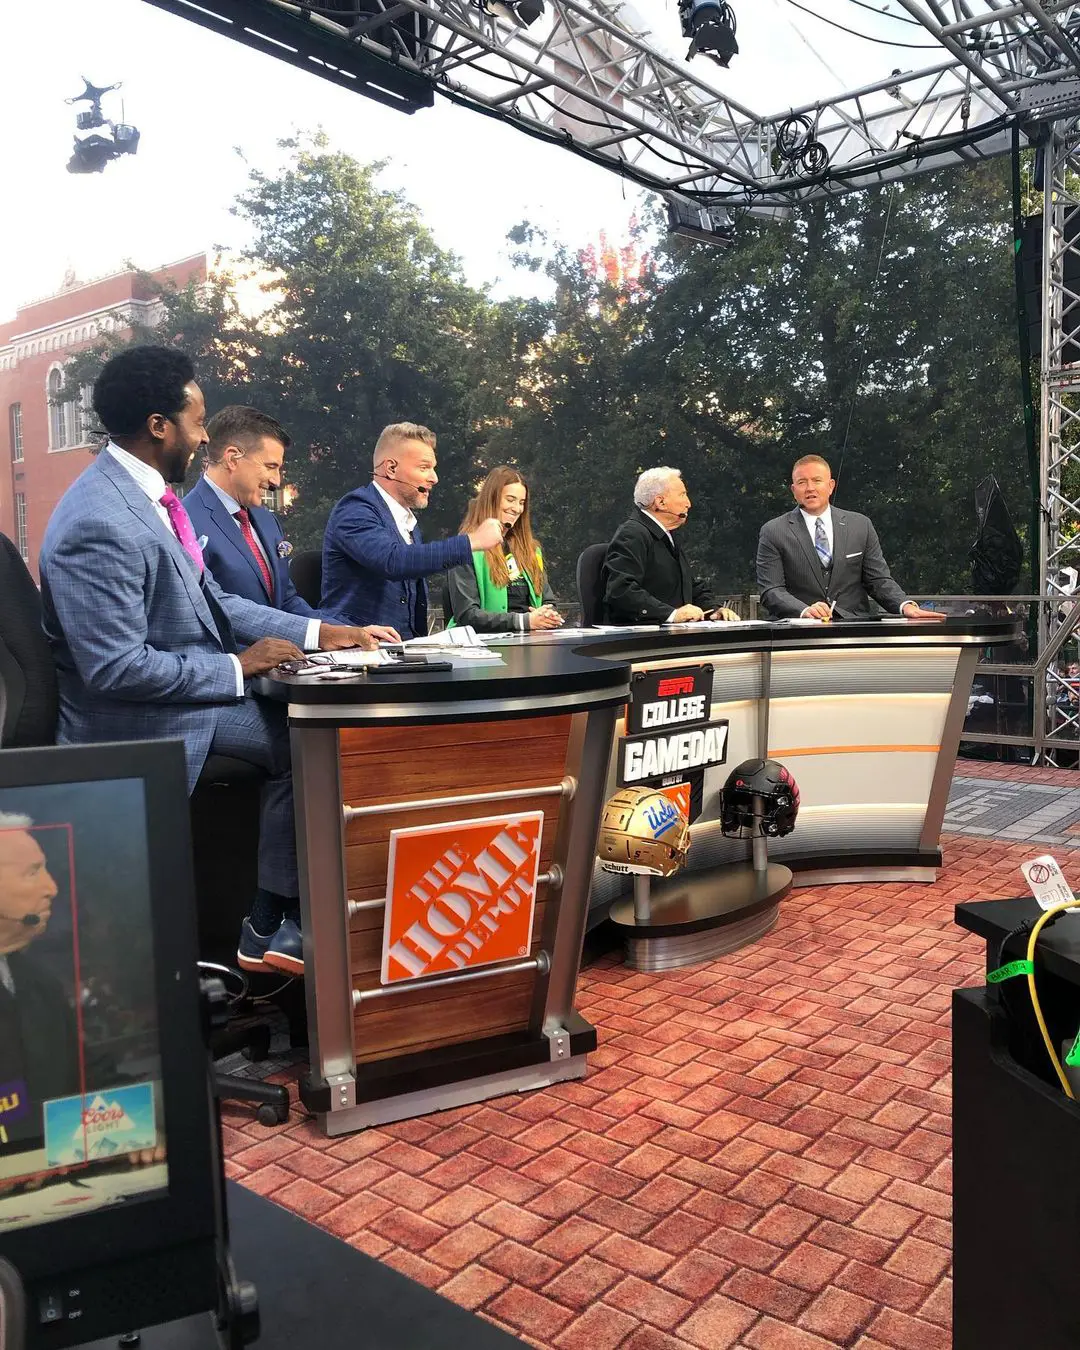 Chris's presence on the show College GameDay, which is broadcast on ESPN, ended recently. 